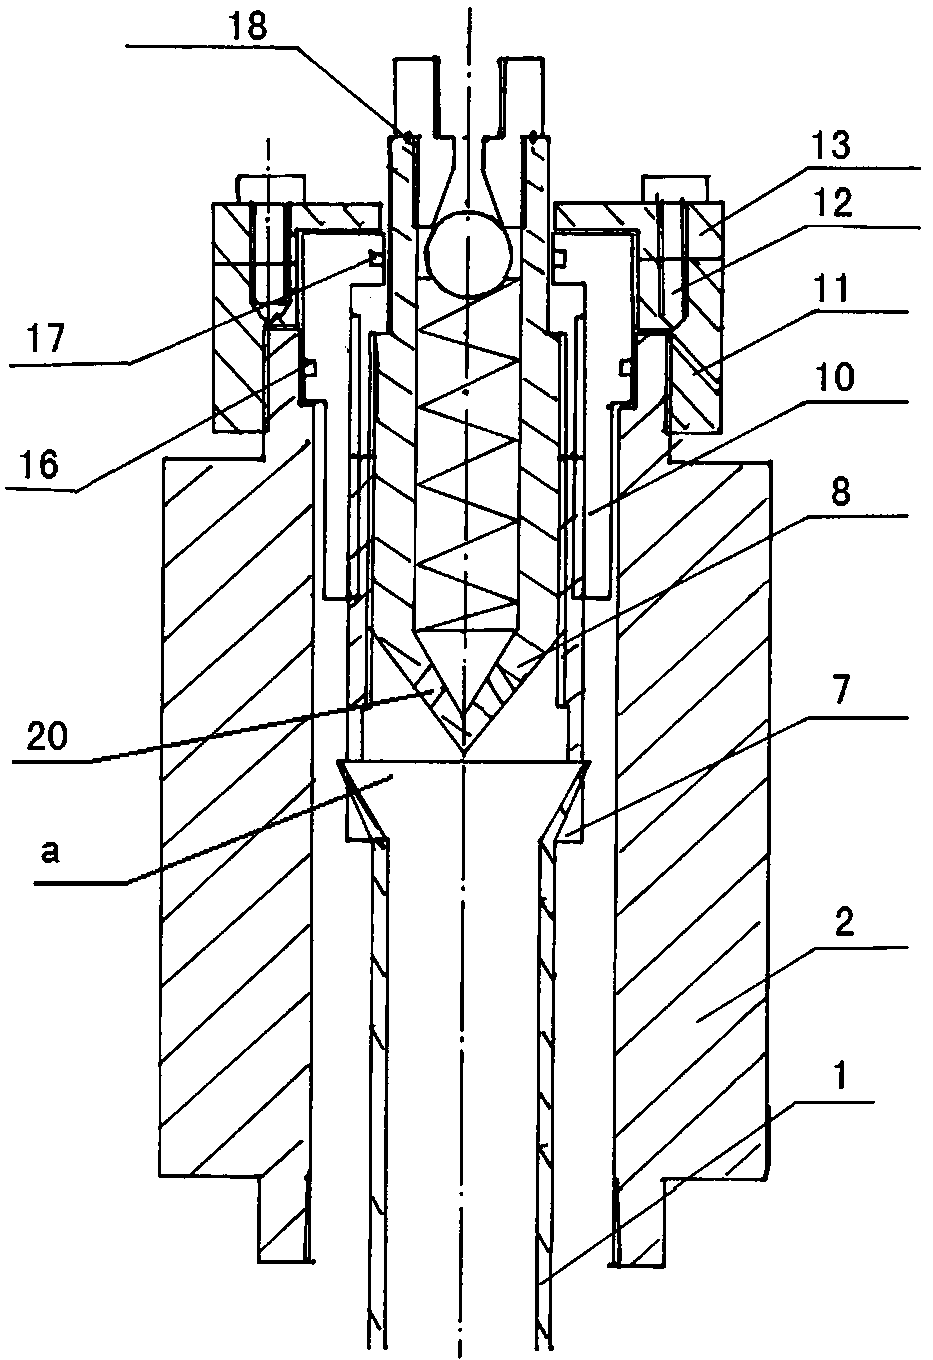 A method of using a coiled tubing cut recovery repair device